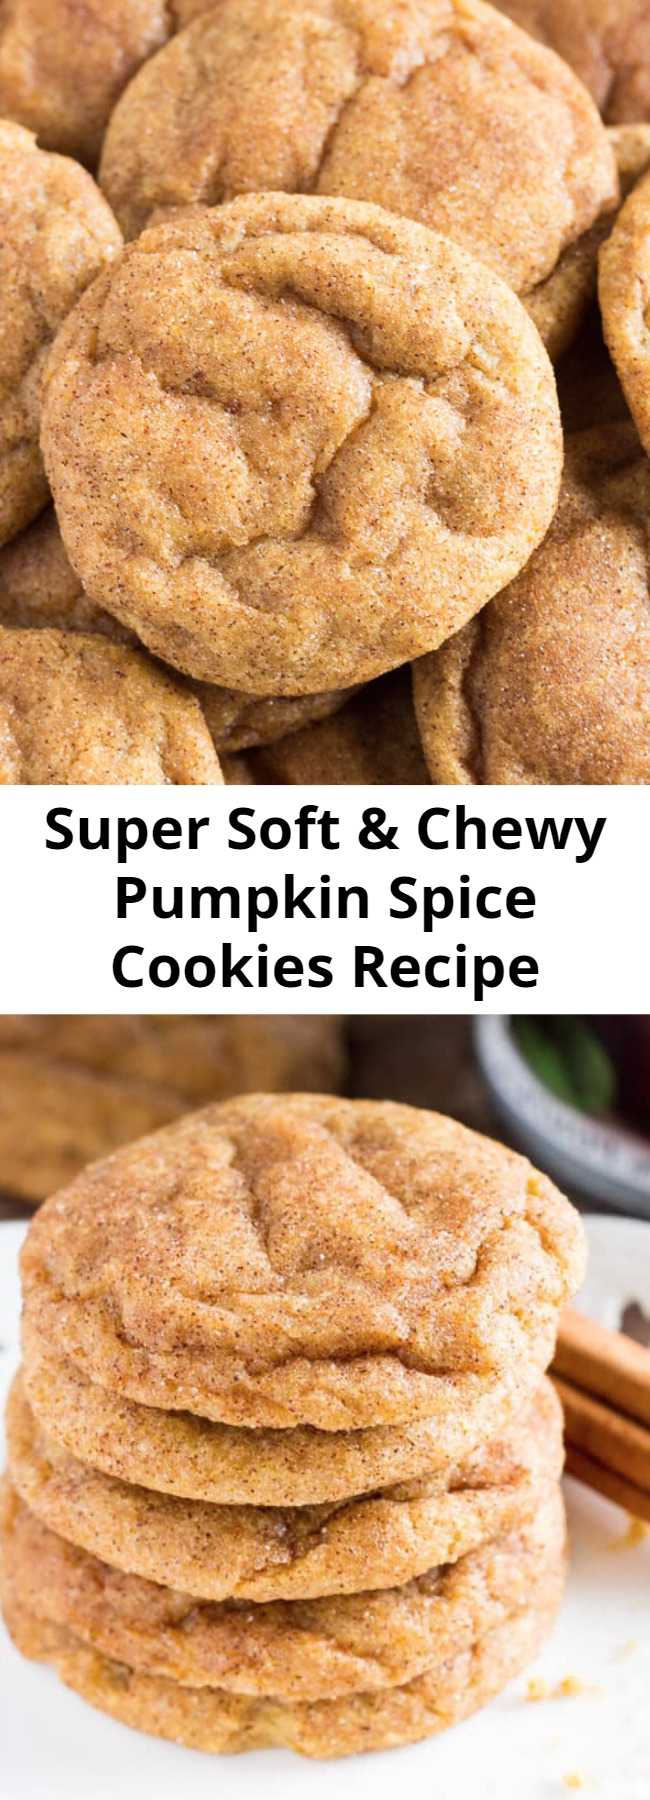 Super Soft & Chewy Pumpkin Spice Cookies Recipe - These pumpkin spice cookies are soft, chewy and perfect for fall. They’re filled with flavor thanks to the pumpkin, vanilla extract, & fall spices. Then they’re rolled in cinnamon sugar for a delicious coating that’ll remind you of snickerdoodles.